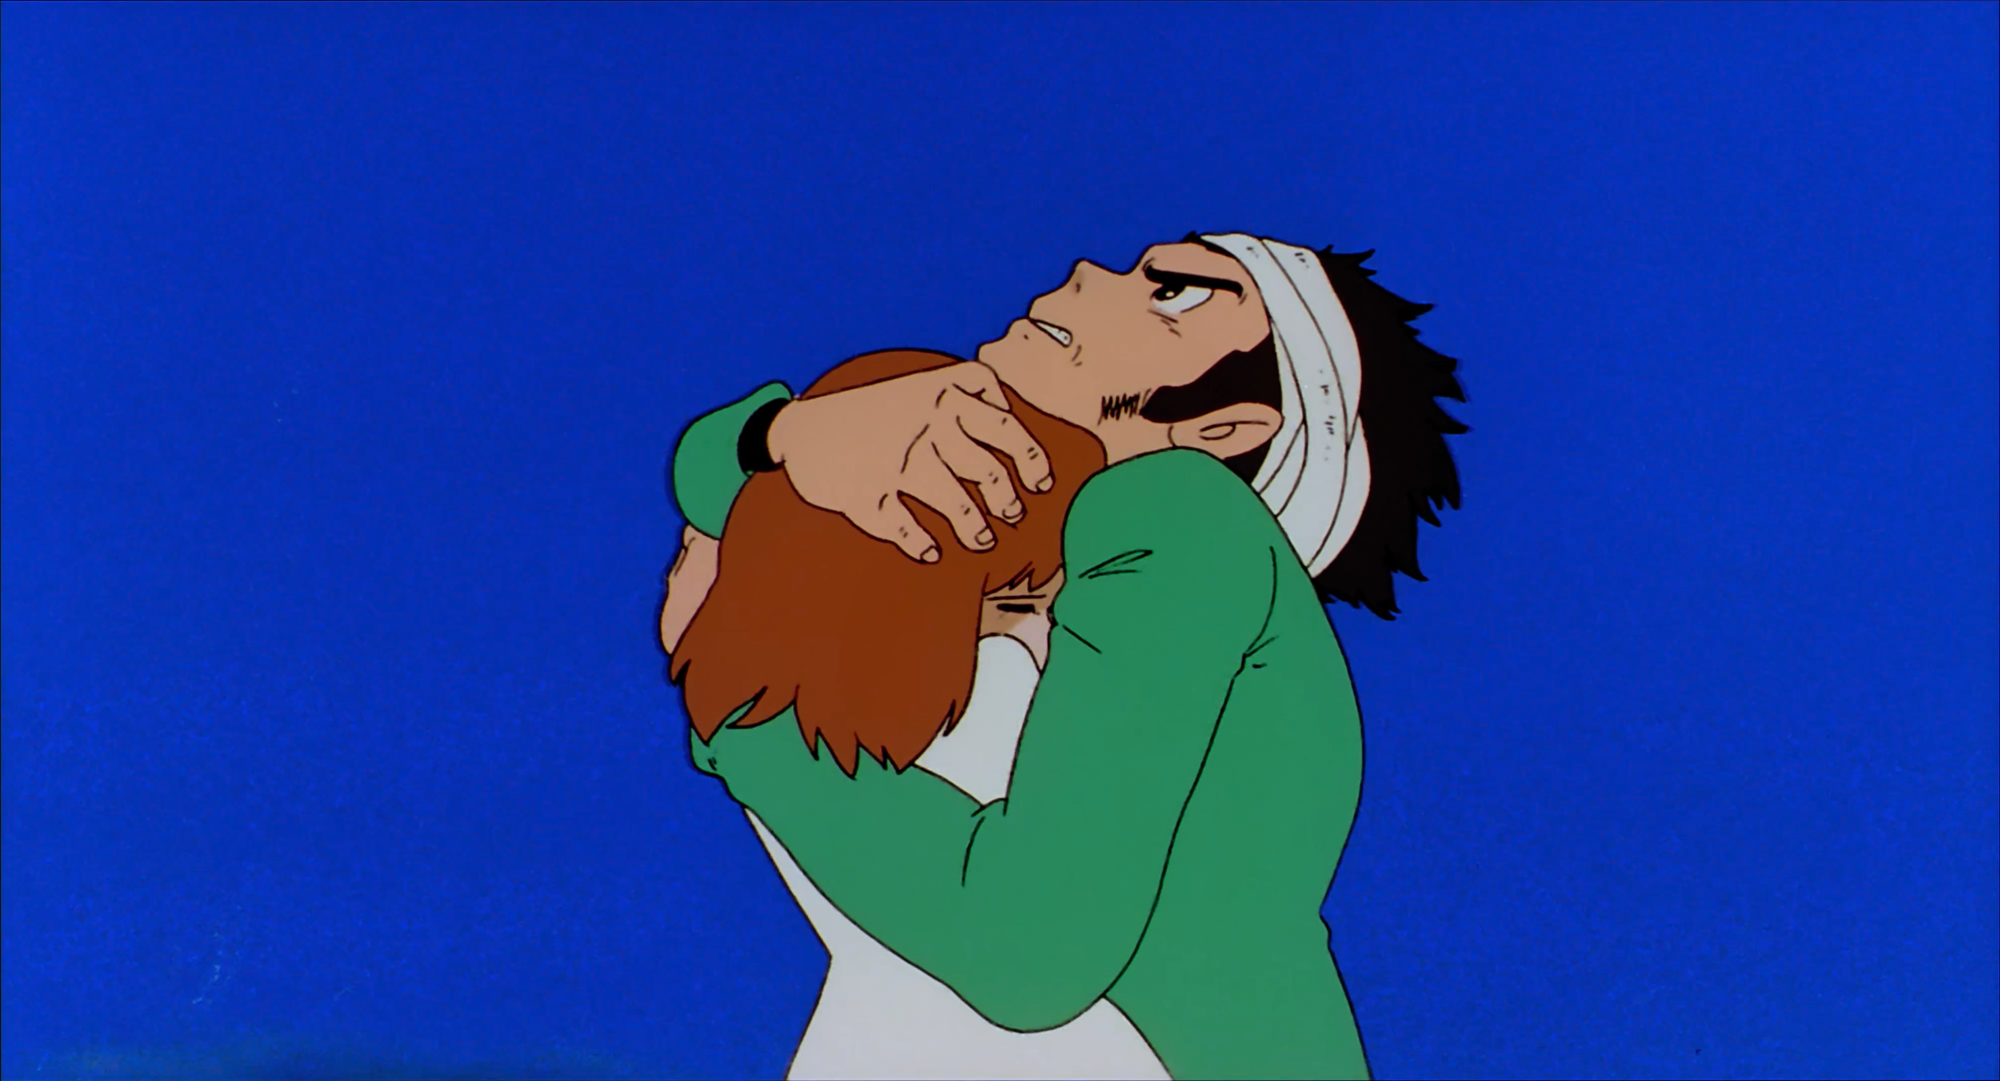 Lupin_Still_1.30.32.15.png